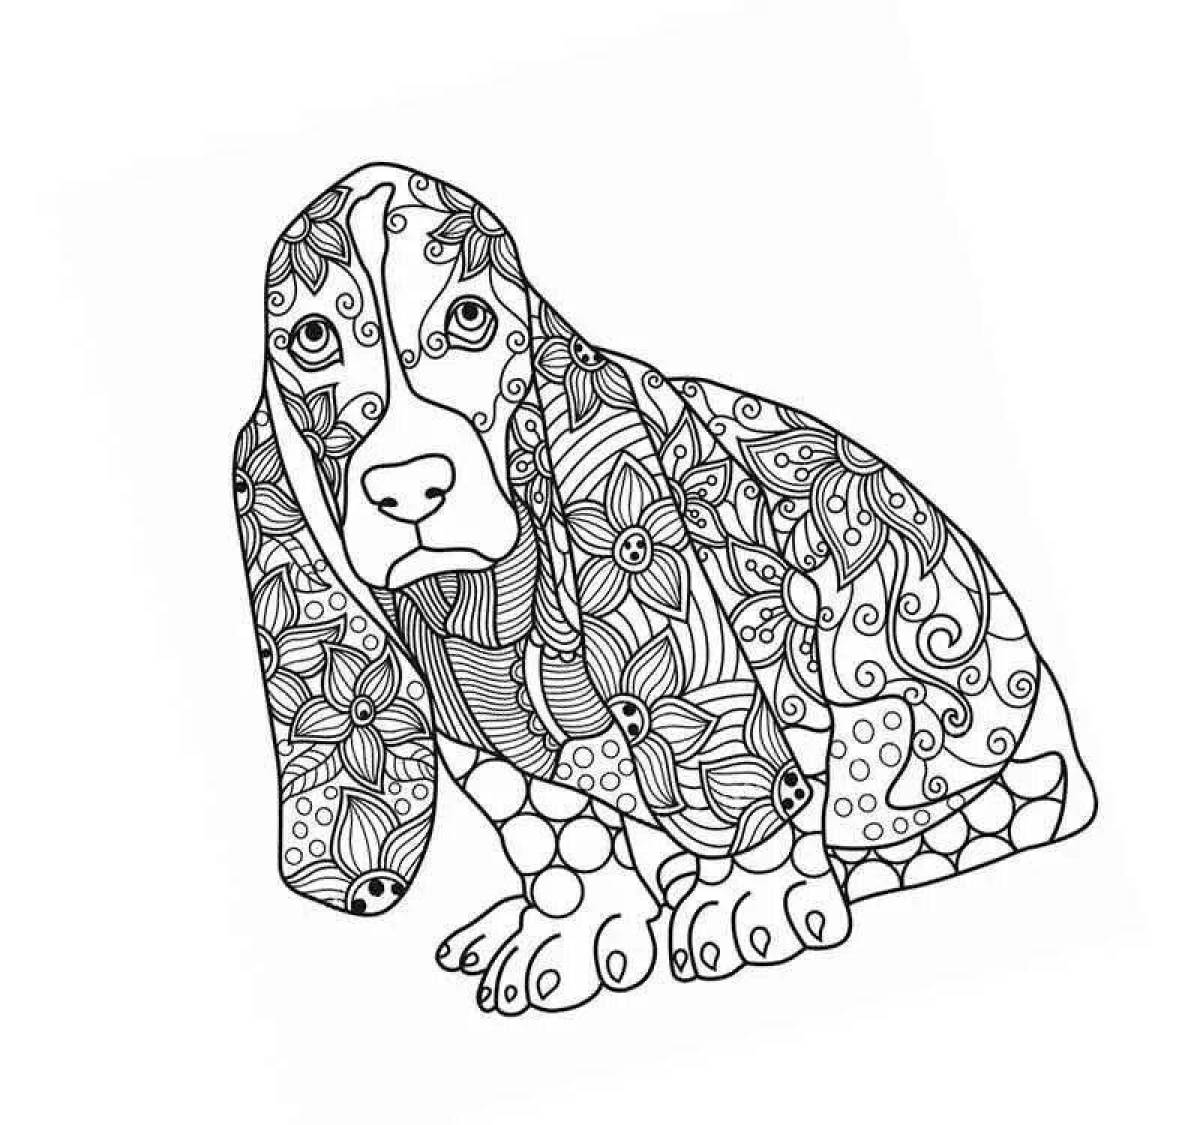 Hypnotic dog antistress coloring page